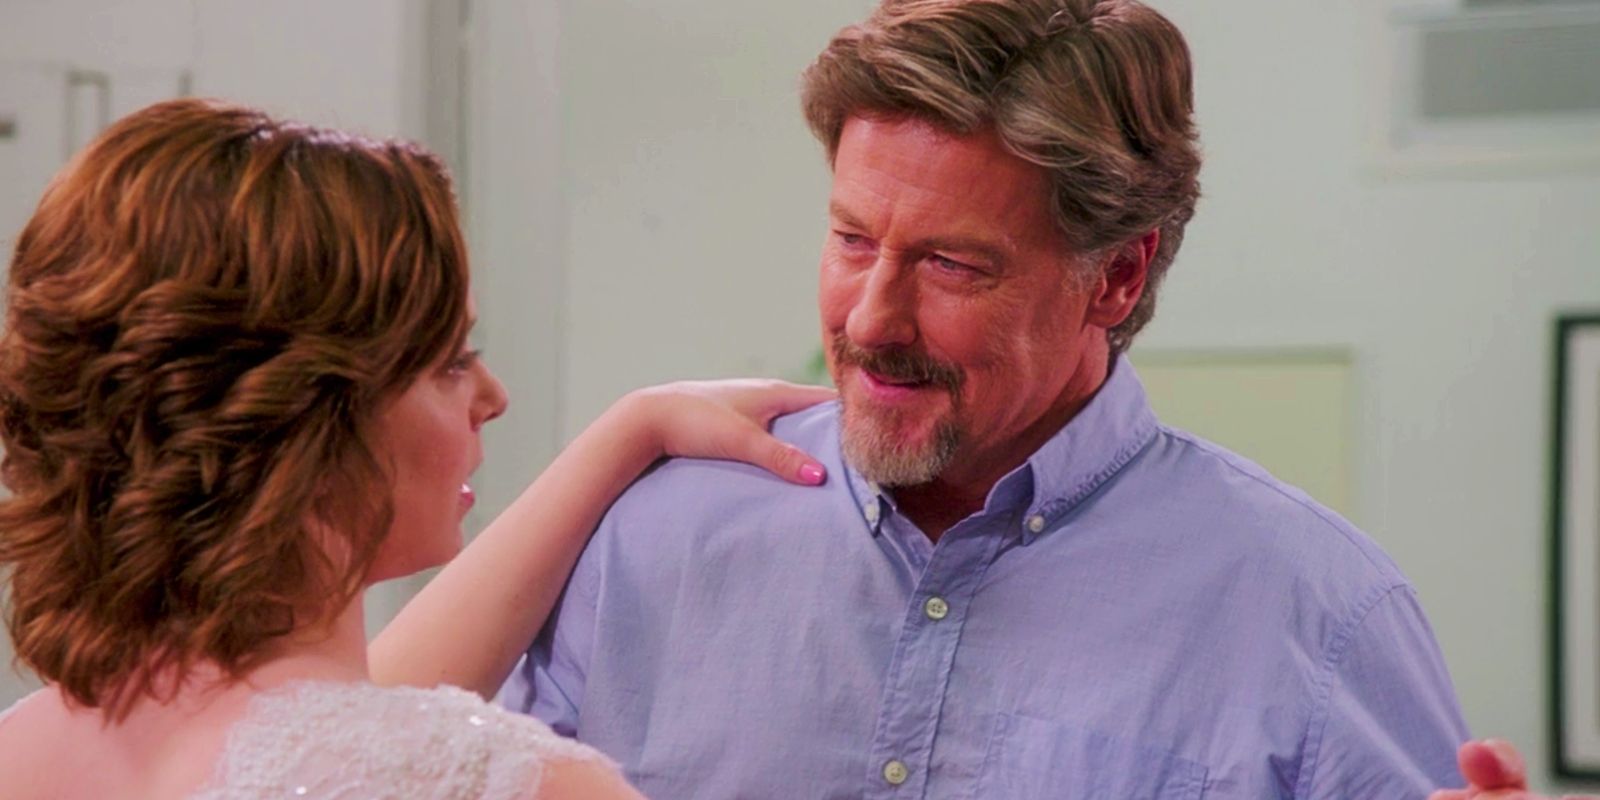 Silas Bunch dances with his daughter Rebecca during a wedding rehearsal in Crazy Ex-Girlfriend.